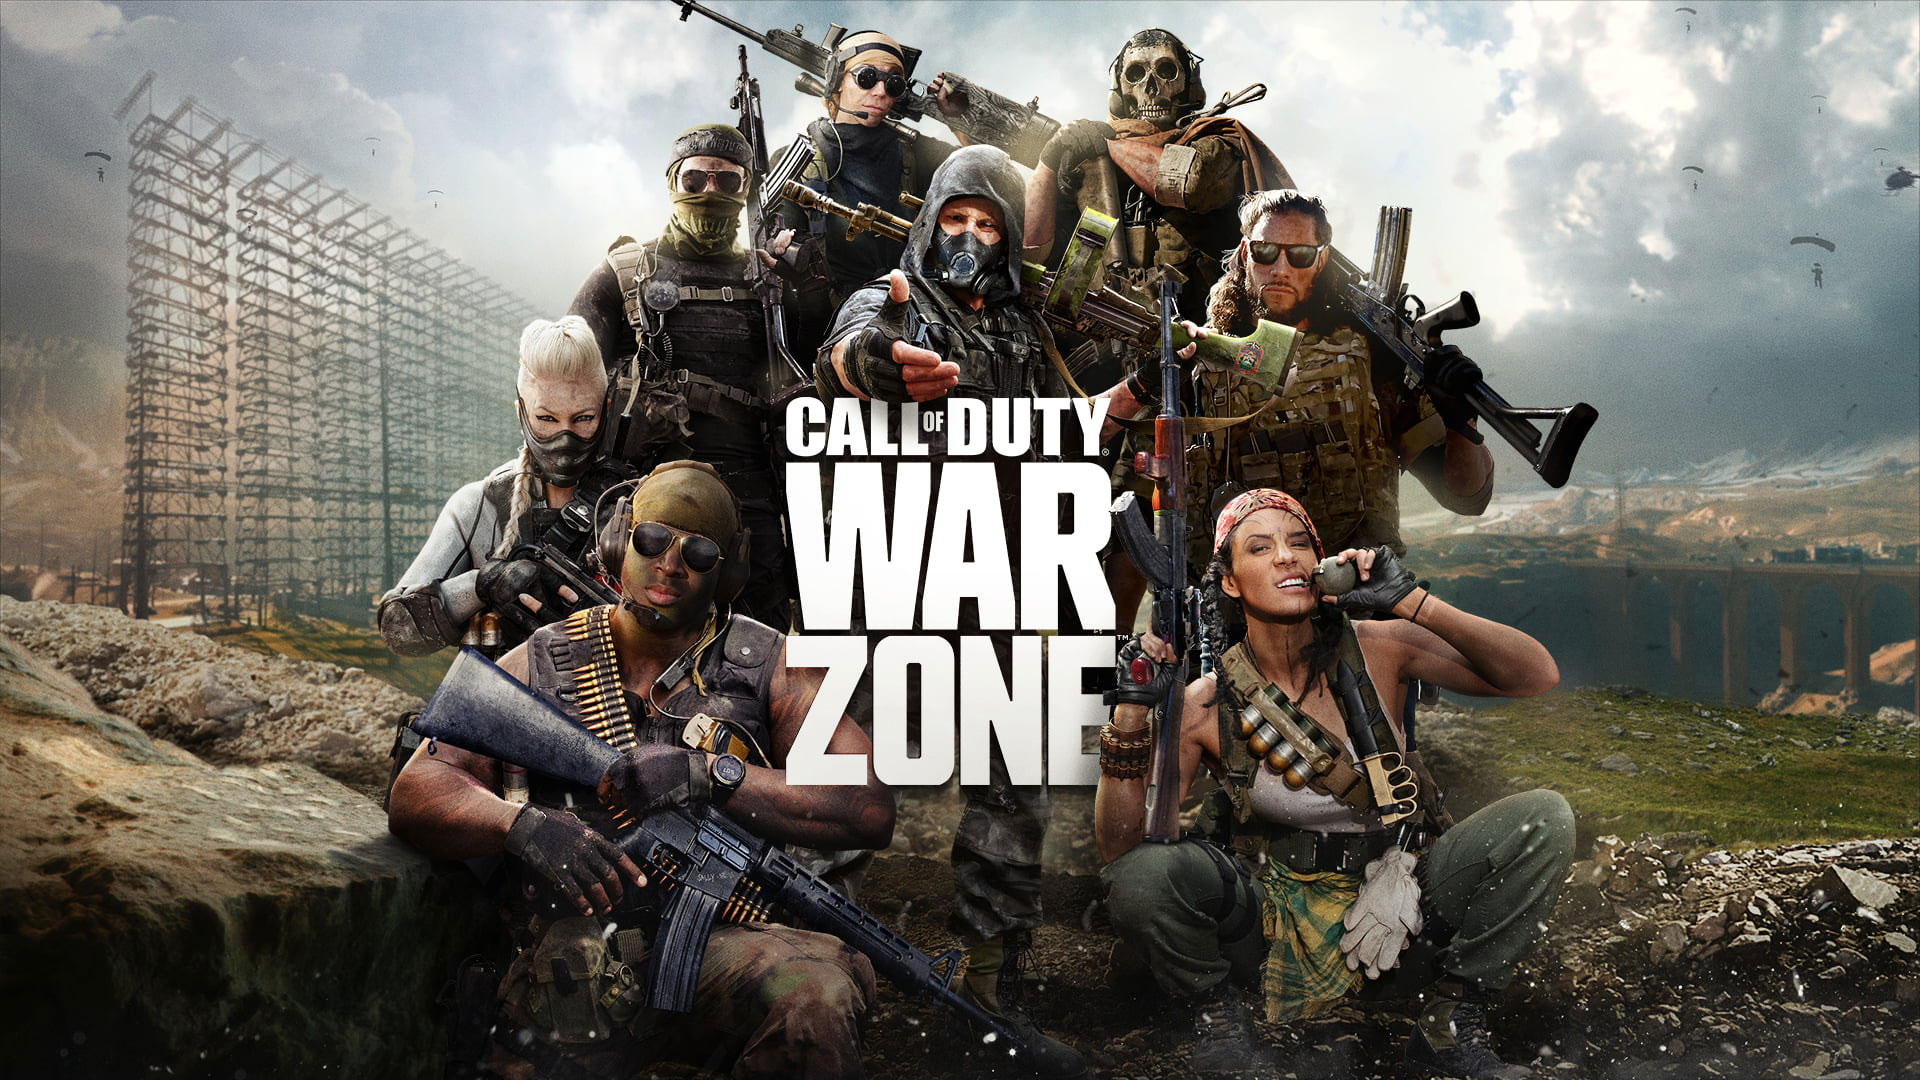 Wallpaper Call Of Duty Warzone, Xbox One